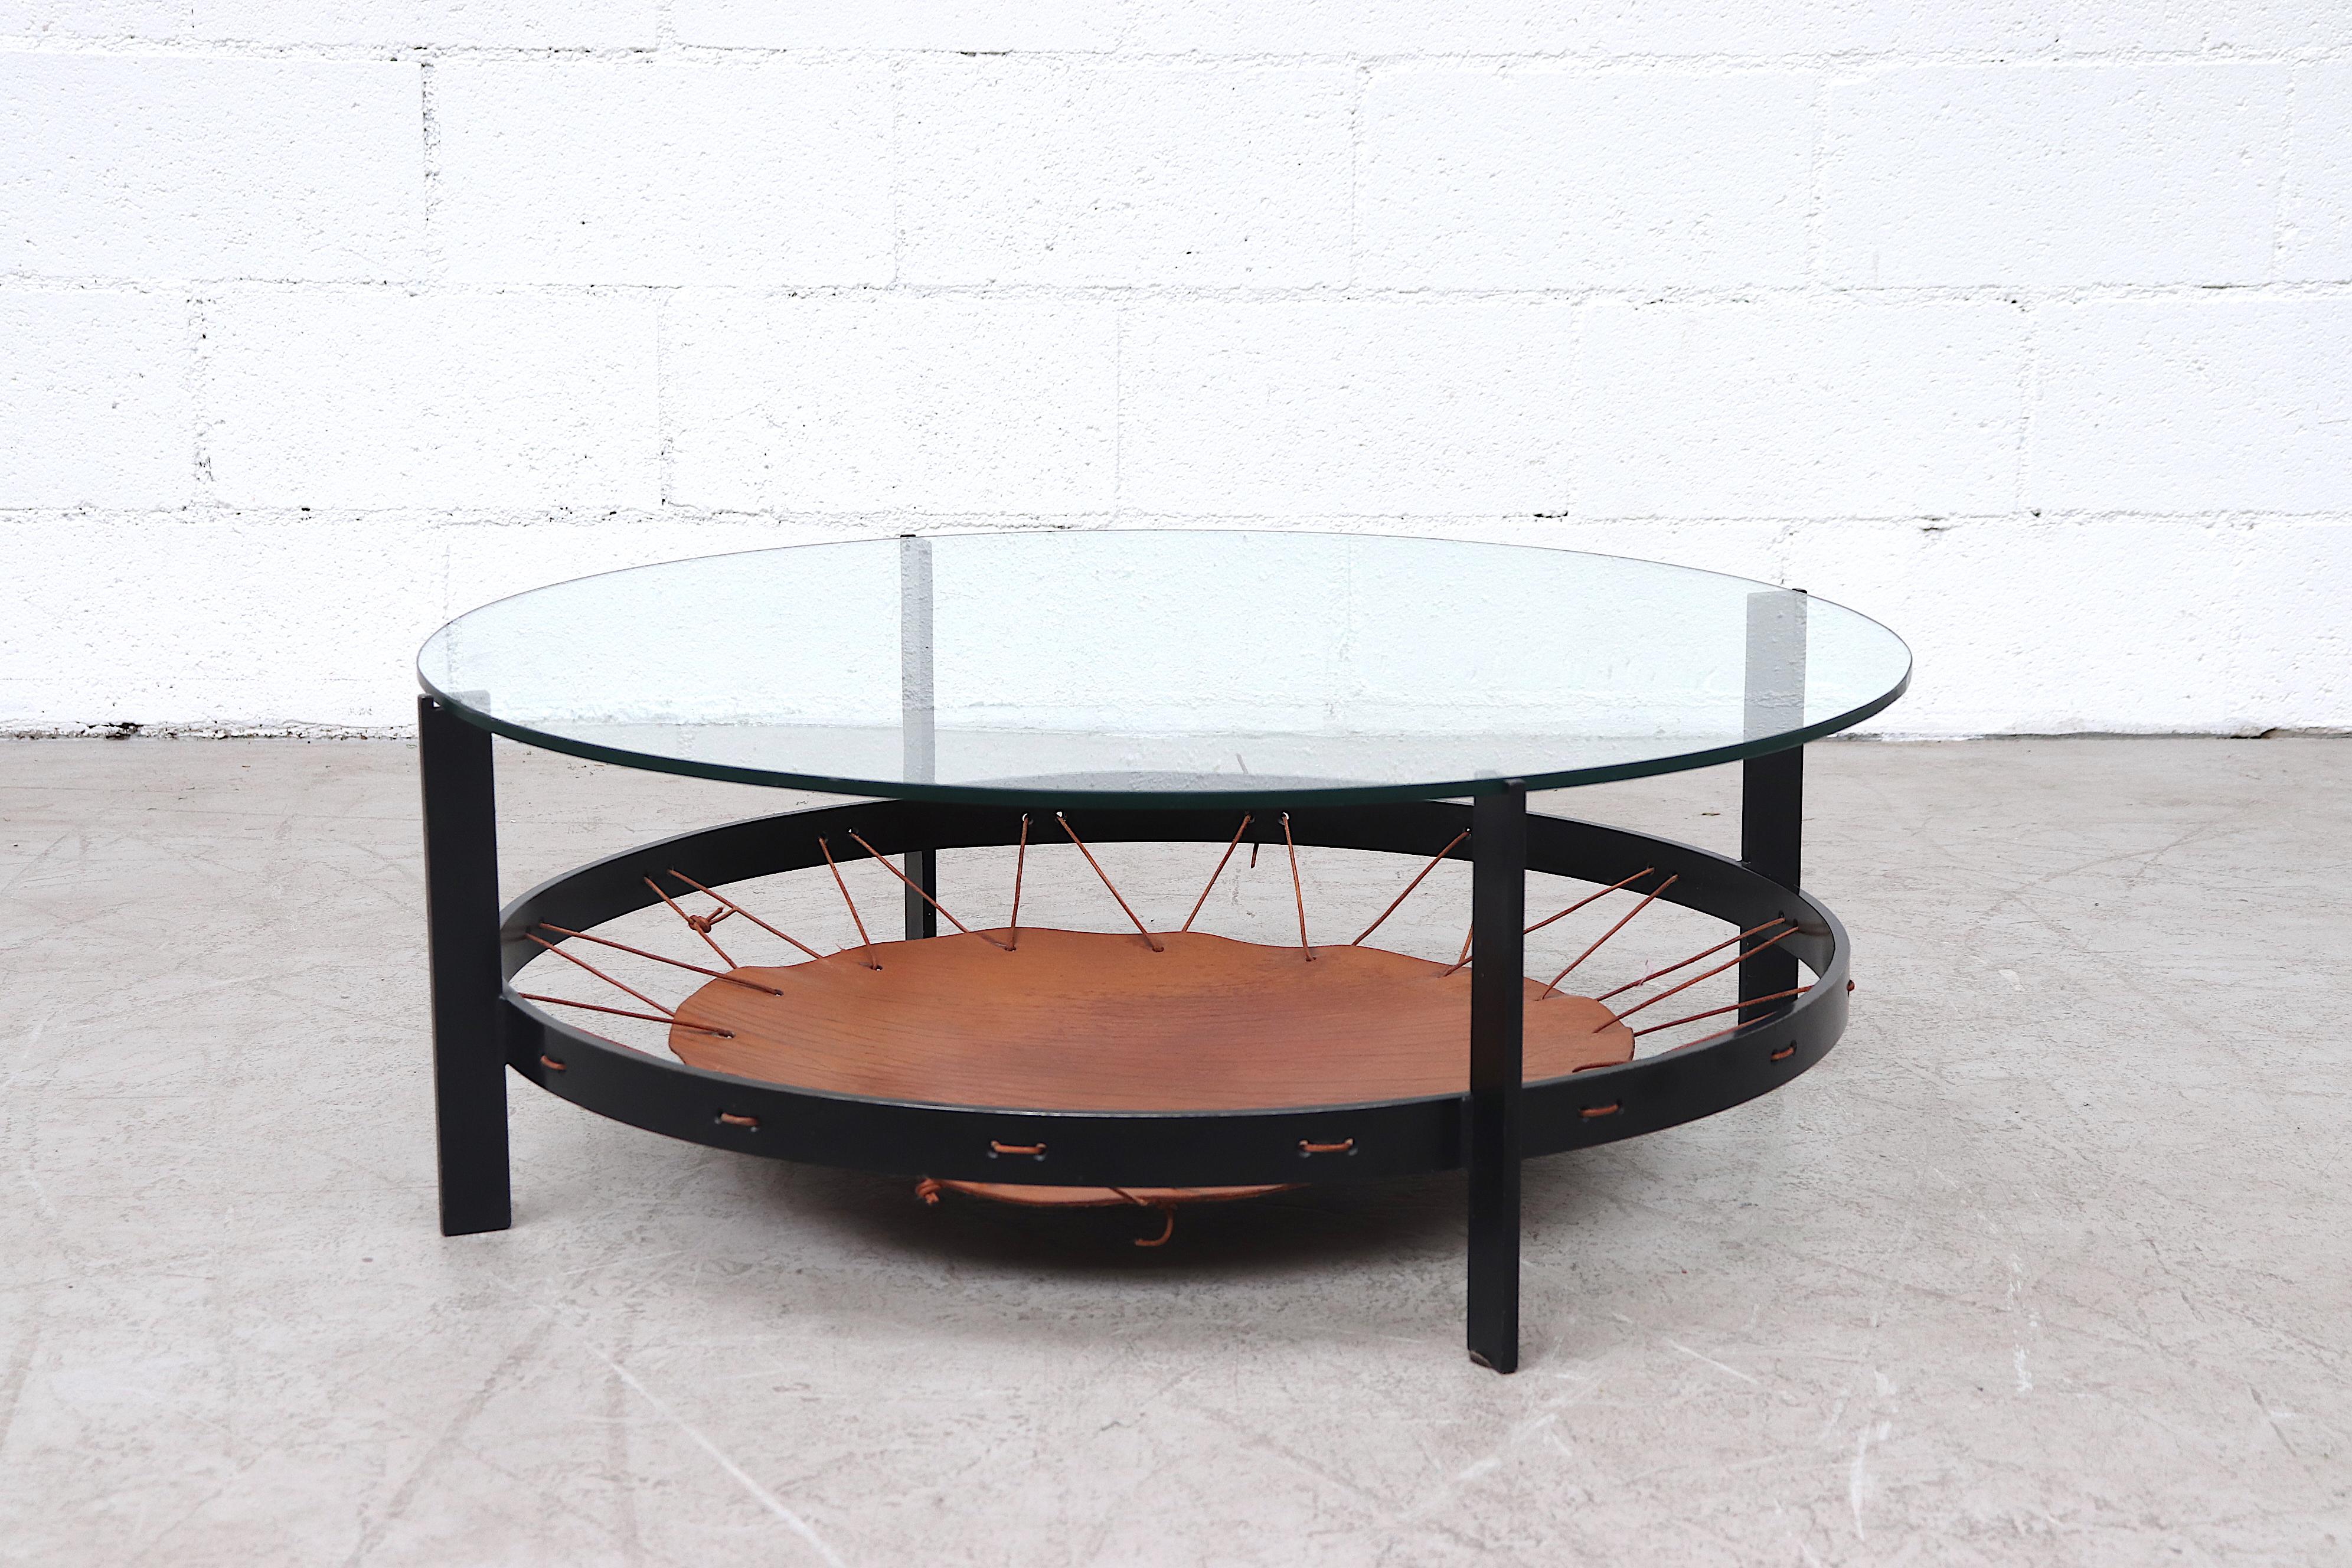 Amazing black enameled iron coffee table with inset glass and leather trampoline magazine rack with nice patina. In original condition with some enamel loss and light scratching.
 